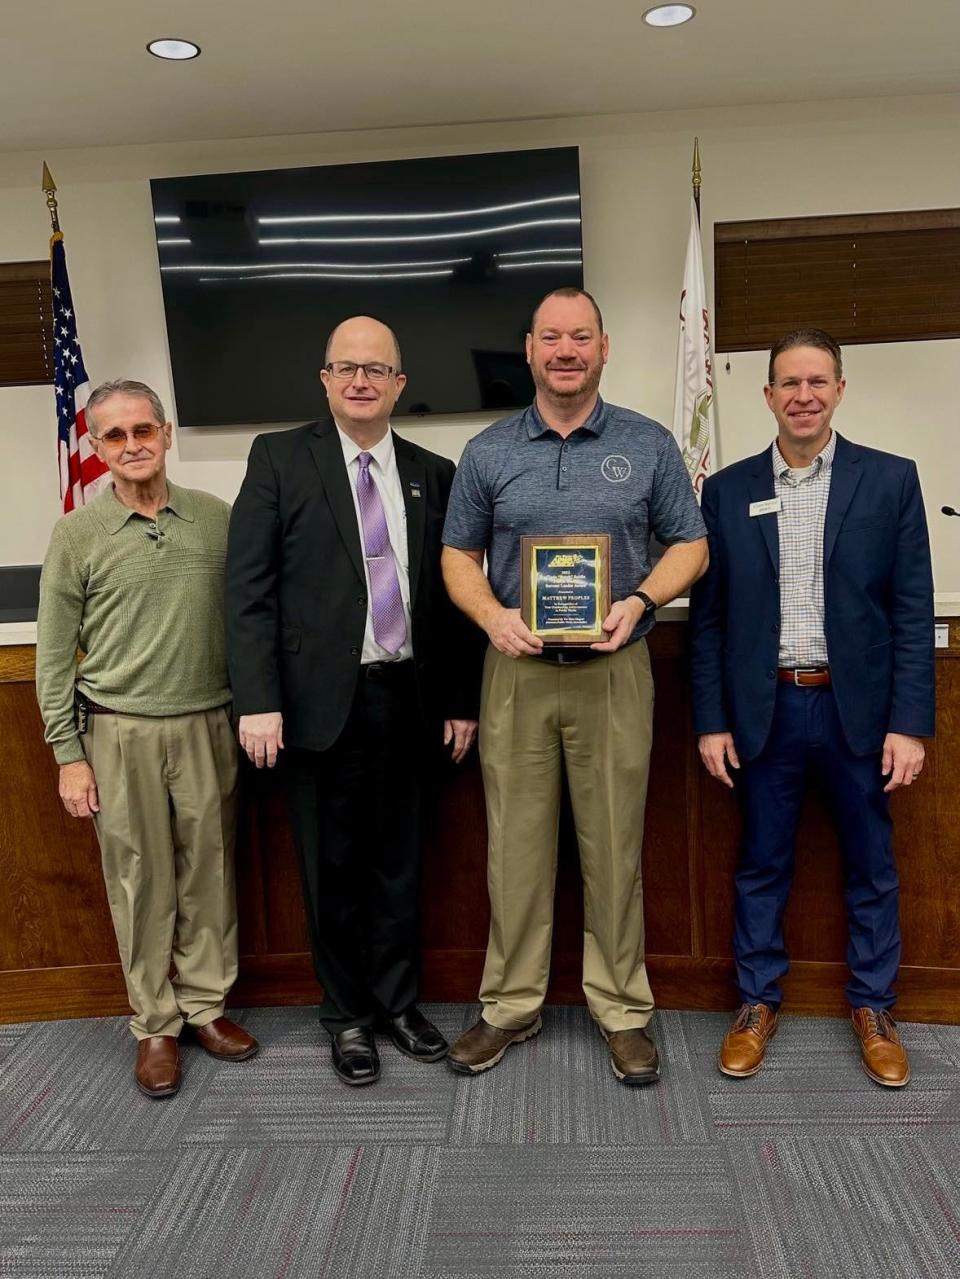 Matt Peoples is presented with the OAPWA 2022 Clyde “Butch” Seidle Public Works Servant Leader Award.  From right to left: Mayor Mike Ebert; Larry Lester, Past President of the OAPWA; Matt Peoples, Canal Winchester Director of Public Service; Glenn Marzluf, OAPWA member.